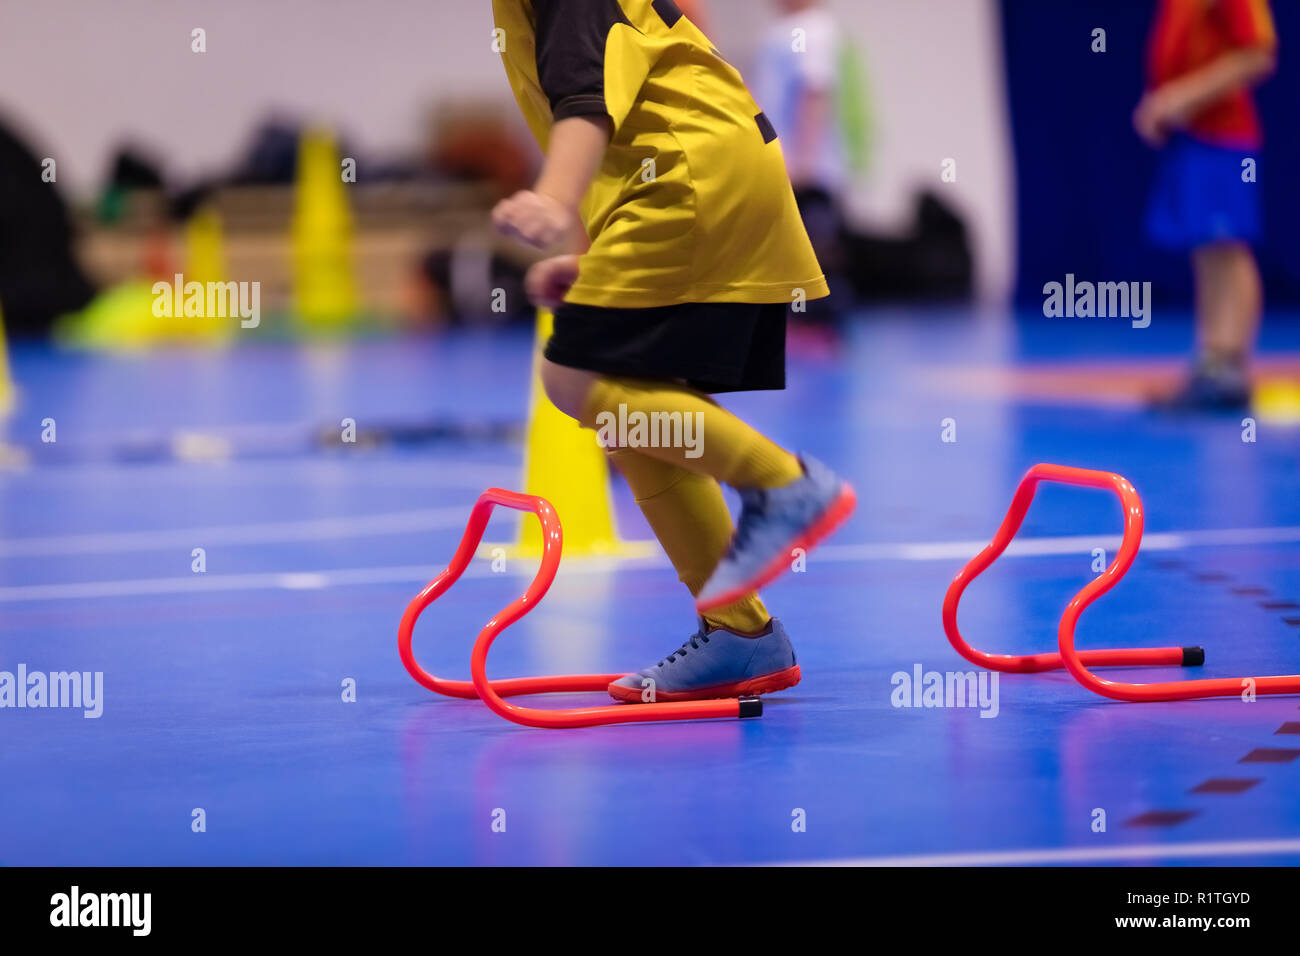 Children training futsal jumping drills. Futsal indoor soccer training session. Kids futsal players exercising for agility and coordination Stock Photo